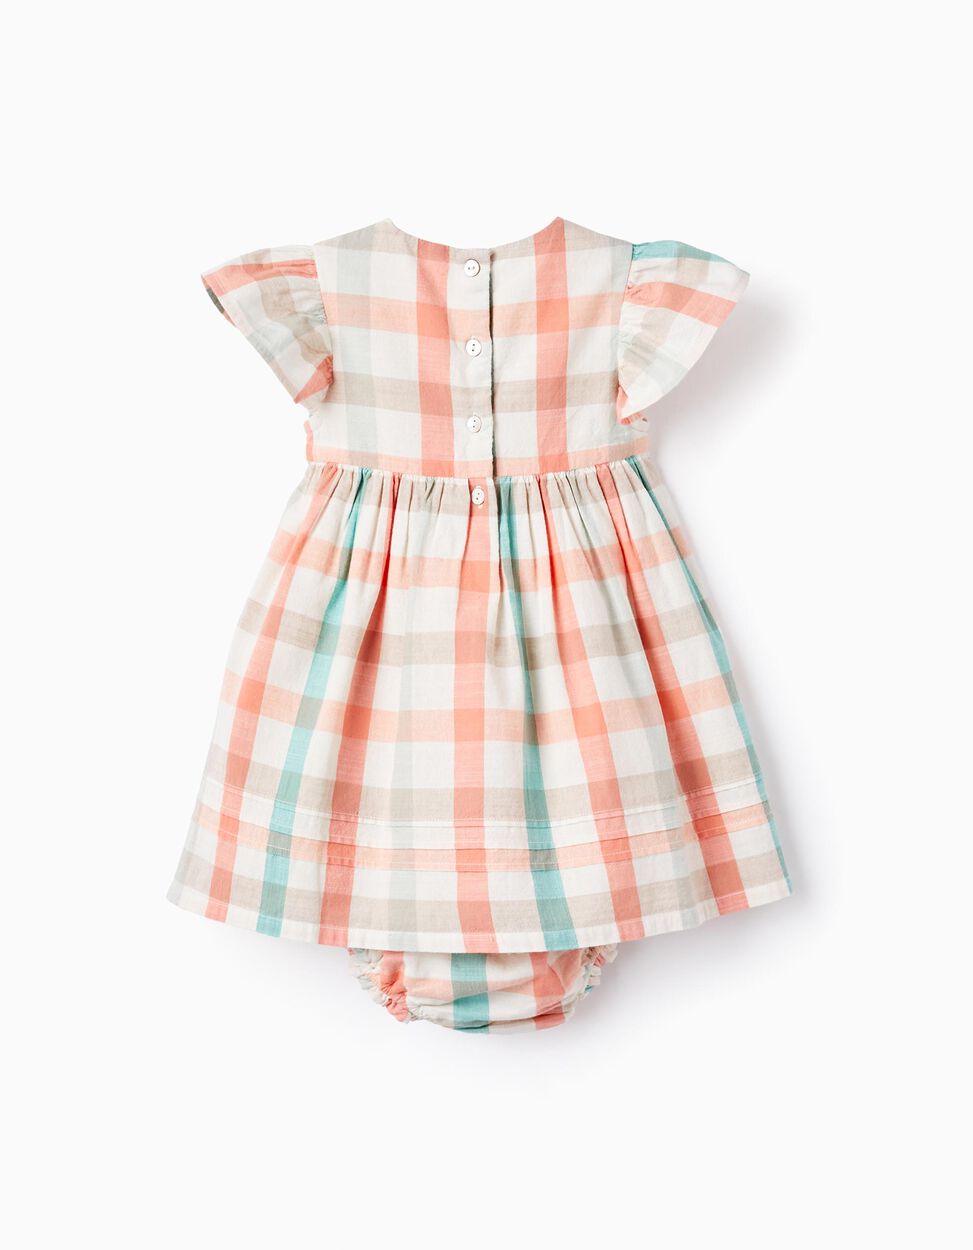 Buy Online Checked Dress + Bloomers for Baby Girls 'B&S', Coral/Green Water